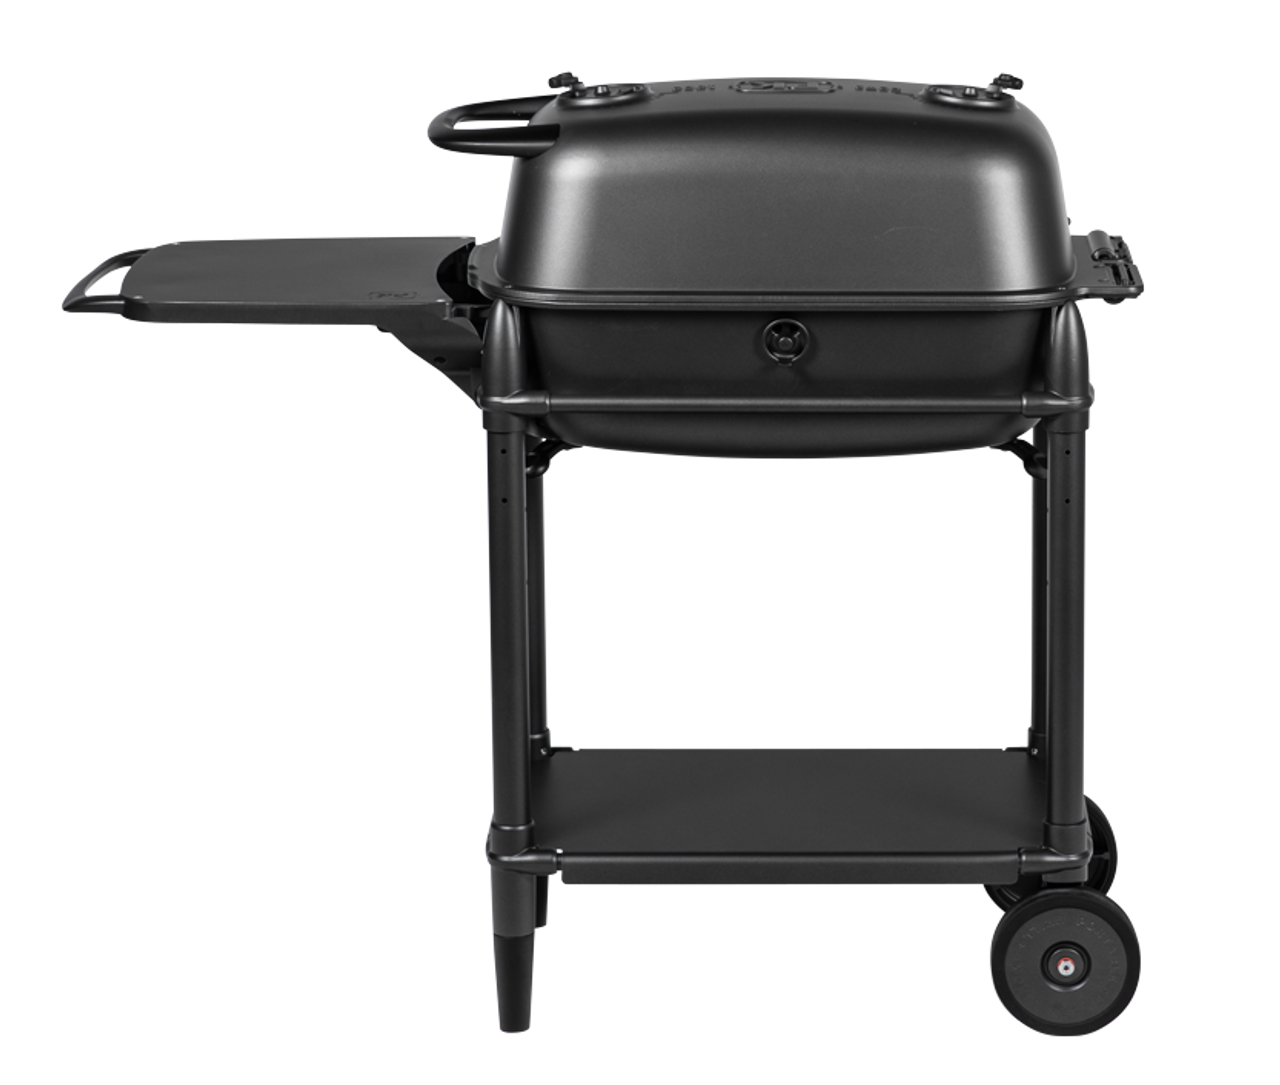 Pk Grills All New Original PK 300 with Grill and Smoker - PK300-BCX